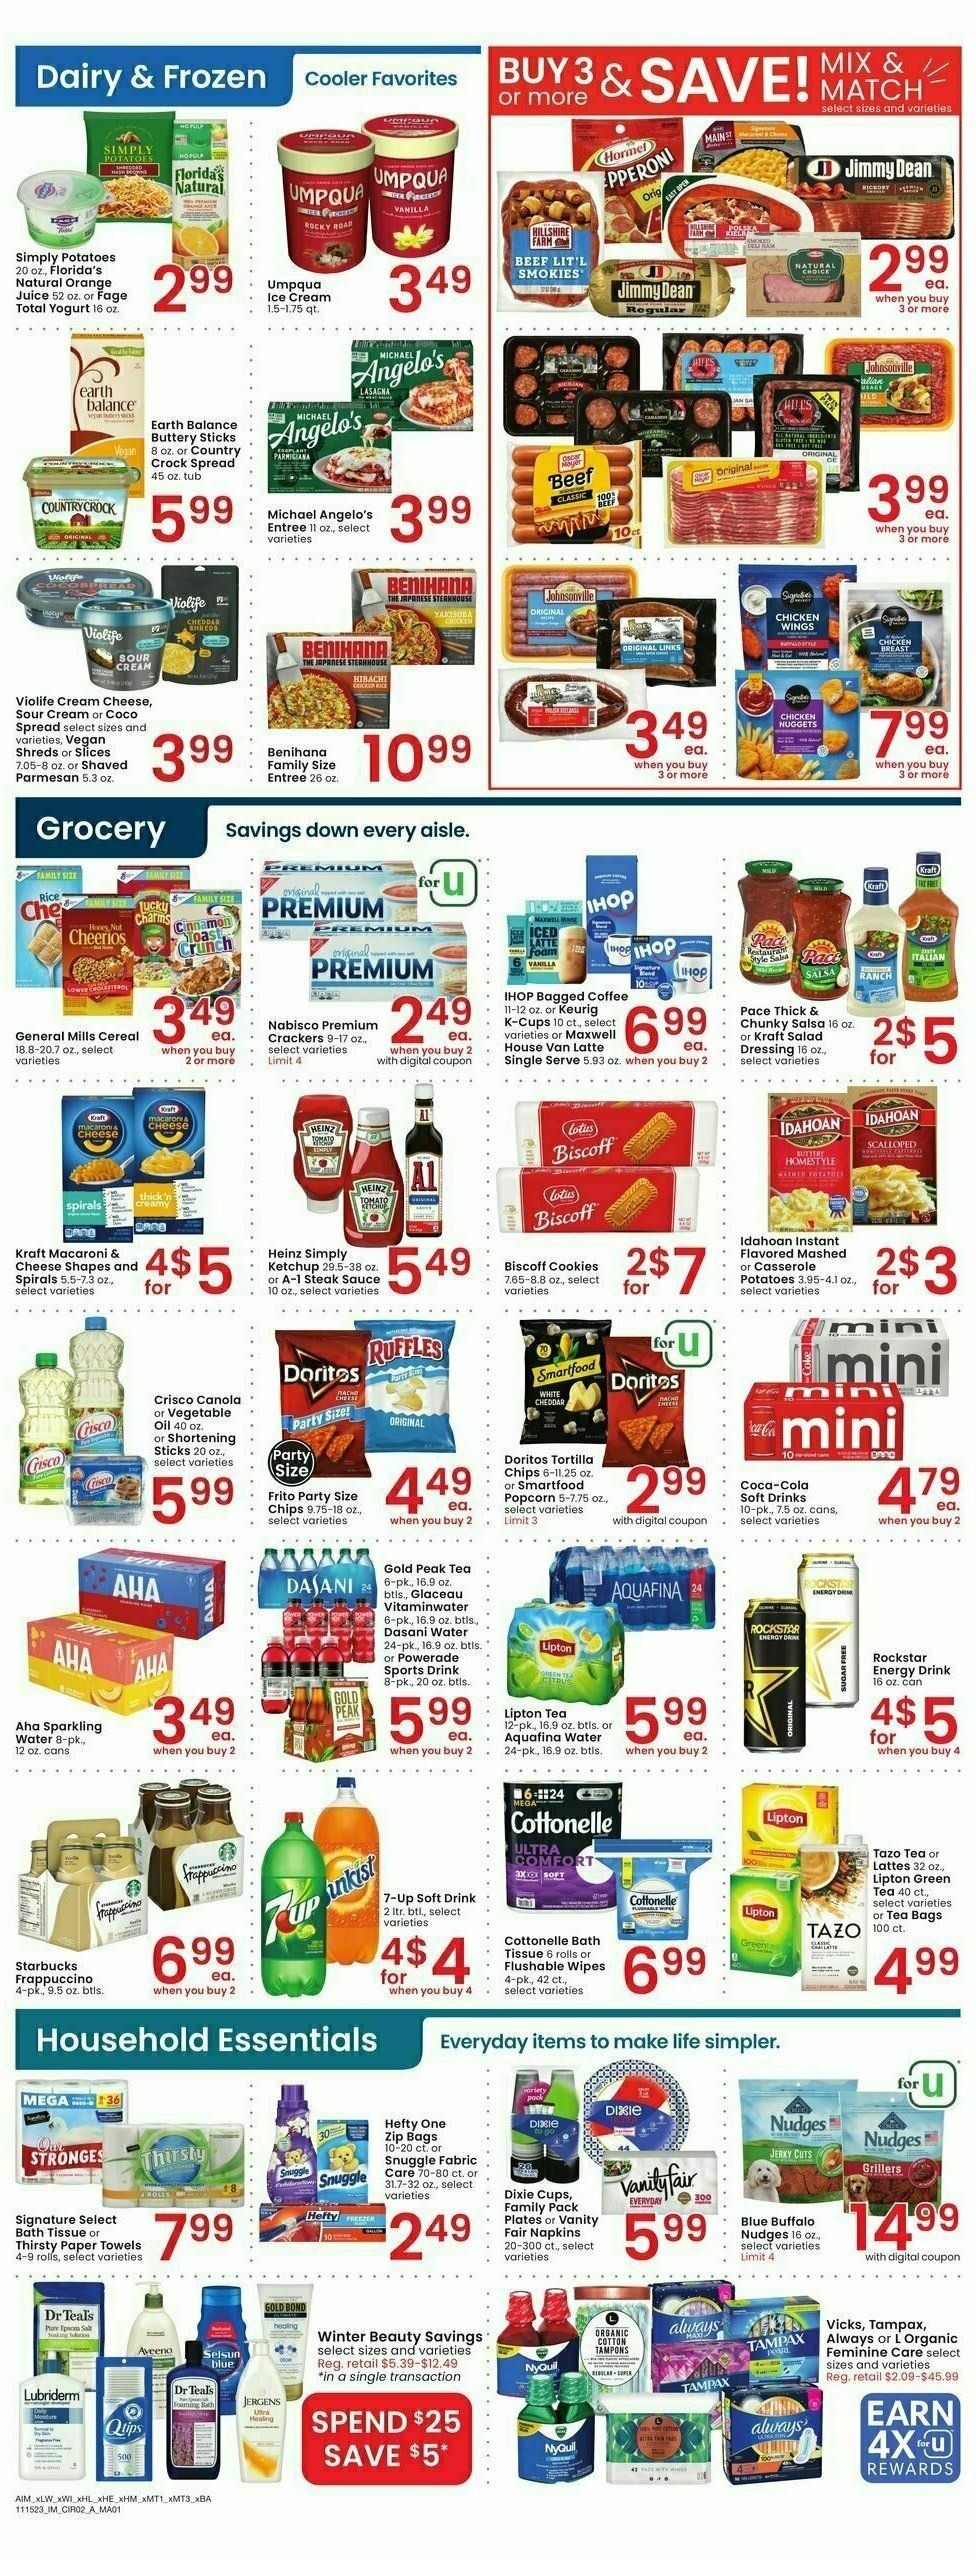 Albertsons Weekly Ad from November 15